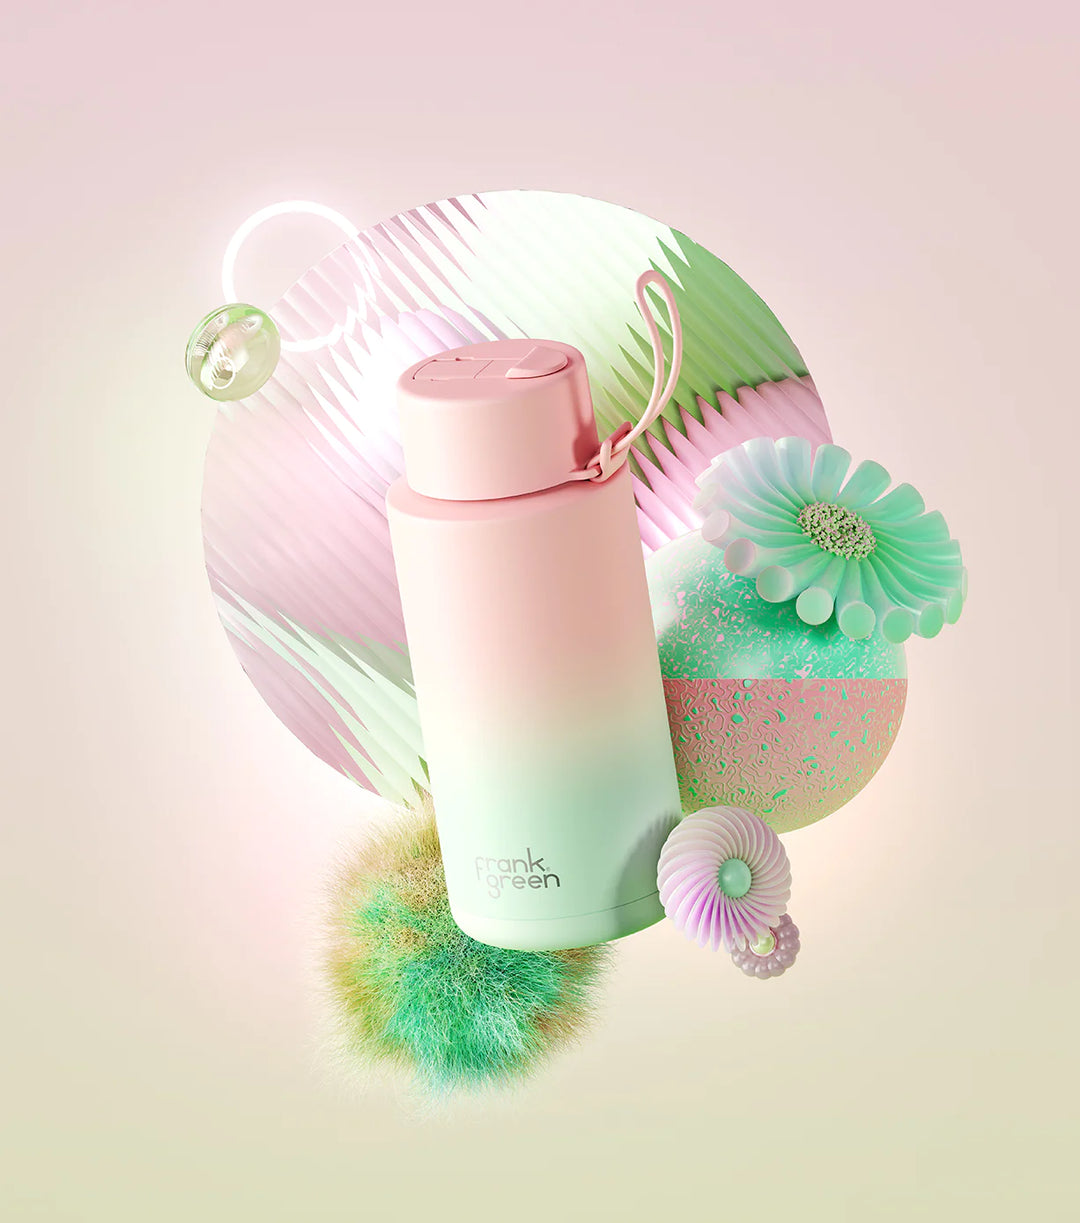 Frank Green | Ceramic Lined Reusable Bottle 34oz with Straw - Gradient Blushed/Mint Gelato | Shut the Front Door